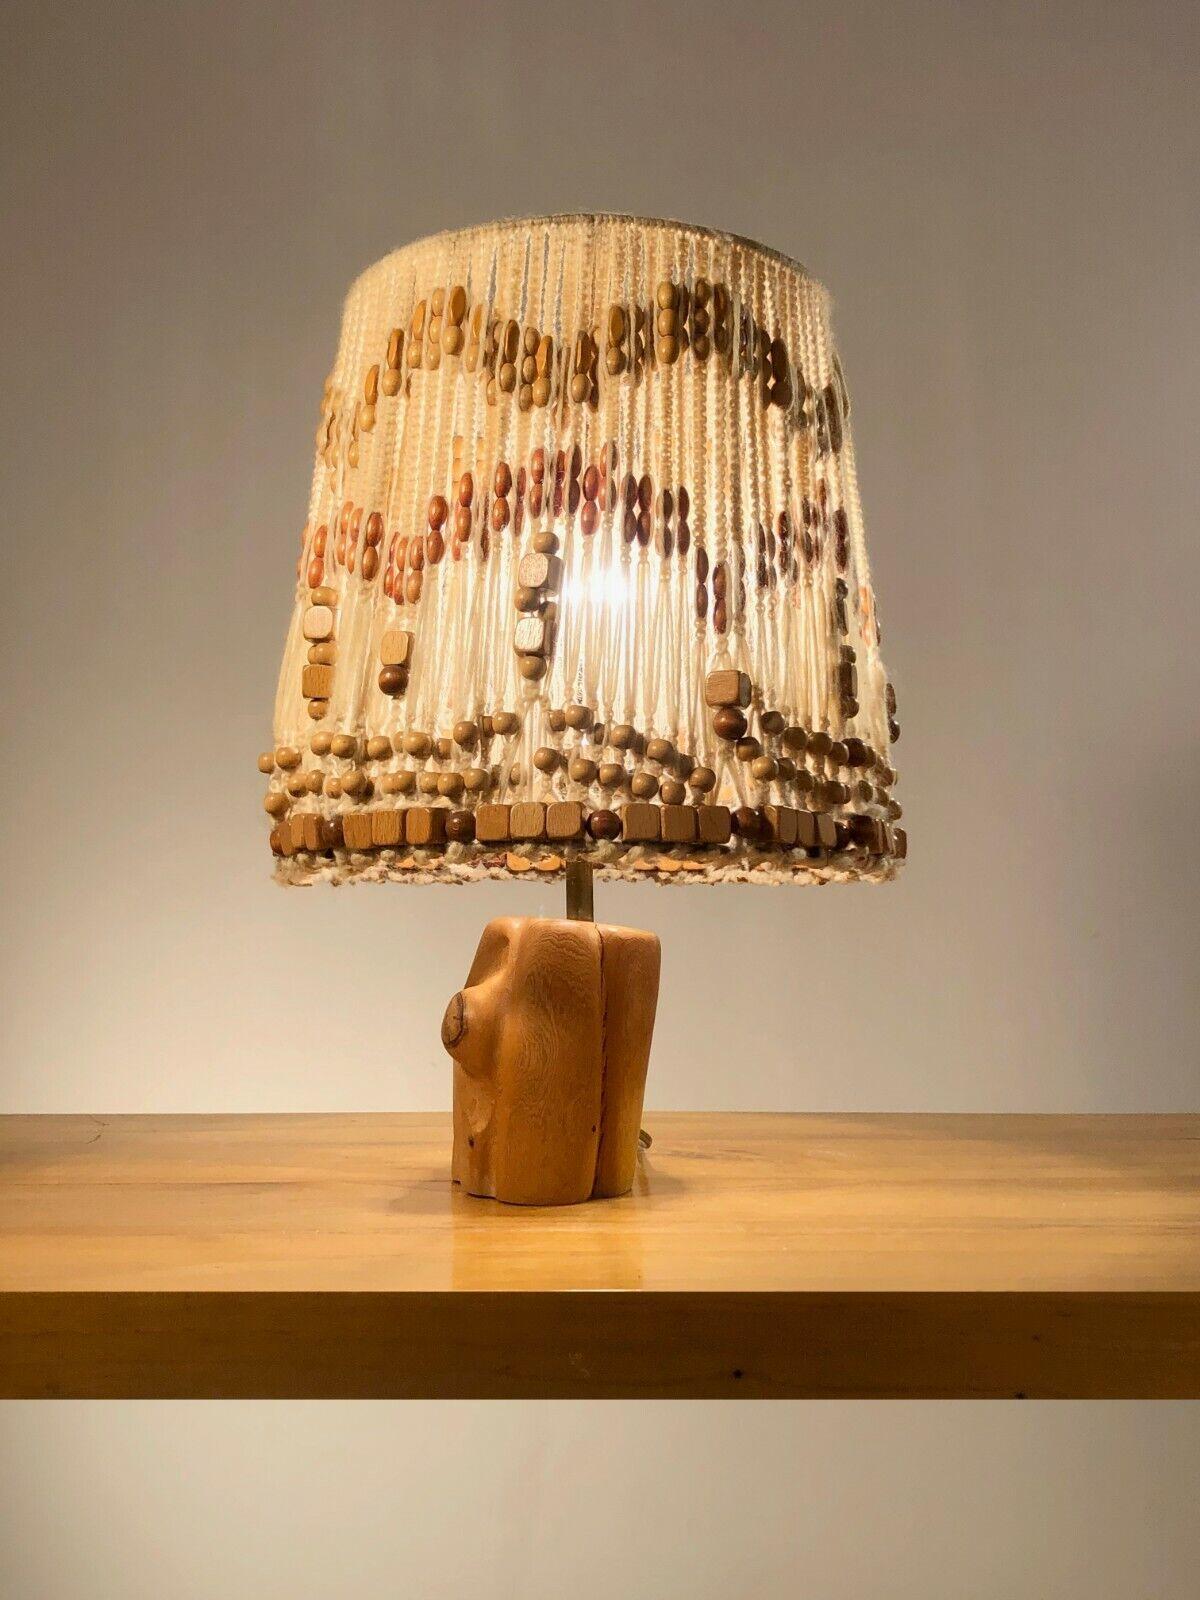 A Sculptural MID-CENTURY-MODERN BRUTALIST RUSTIC Wood TABLE LAMP,  France 1950 For Sale 2